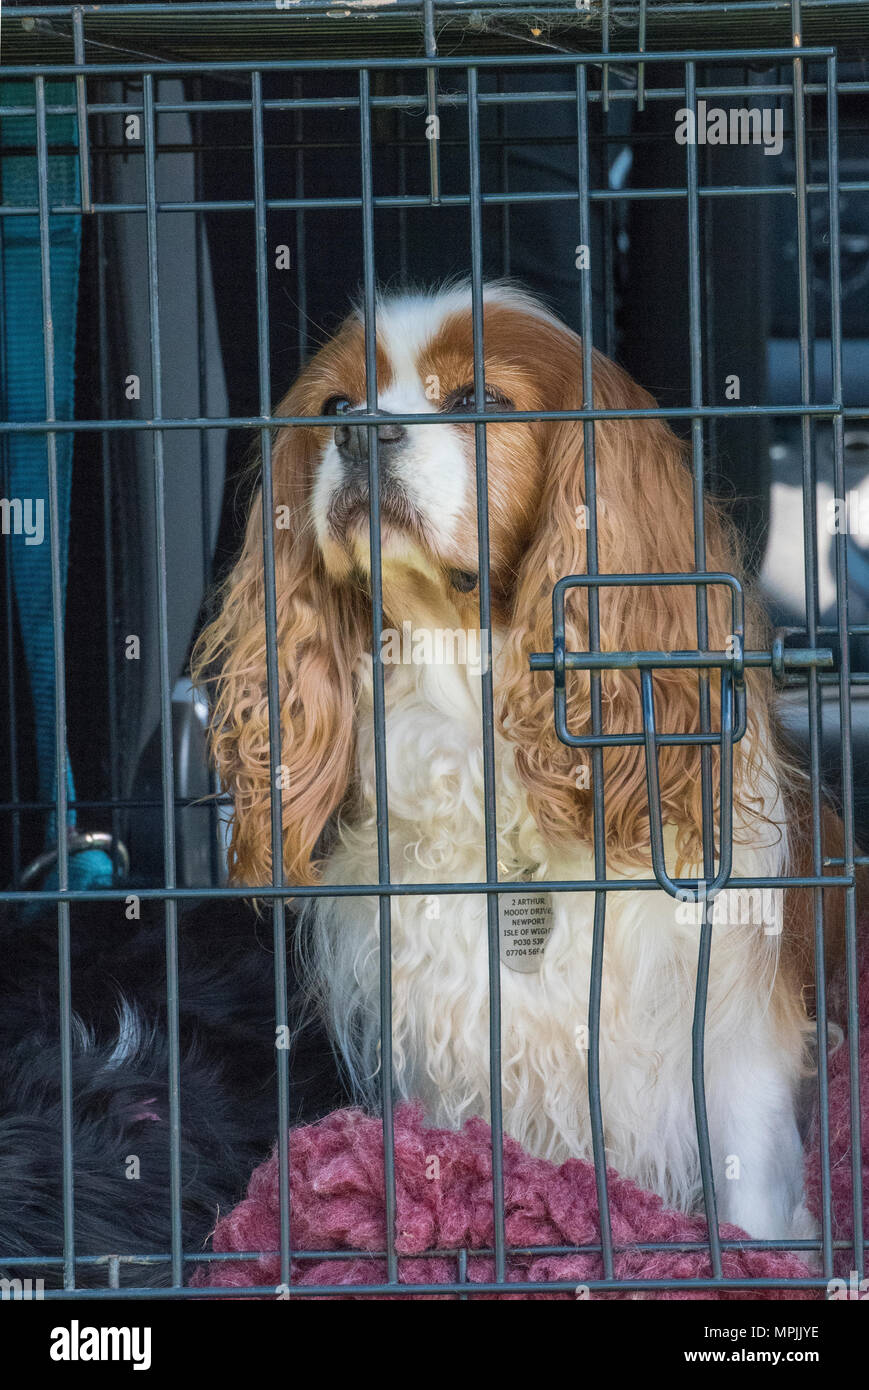 a king Charles cavalier spaniel dog in a crate or dog cage in the back of a car for transportation in a vehicle safely and contained in wire box. Stock Photo